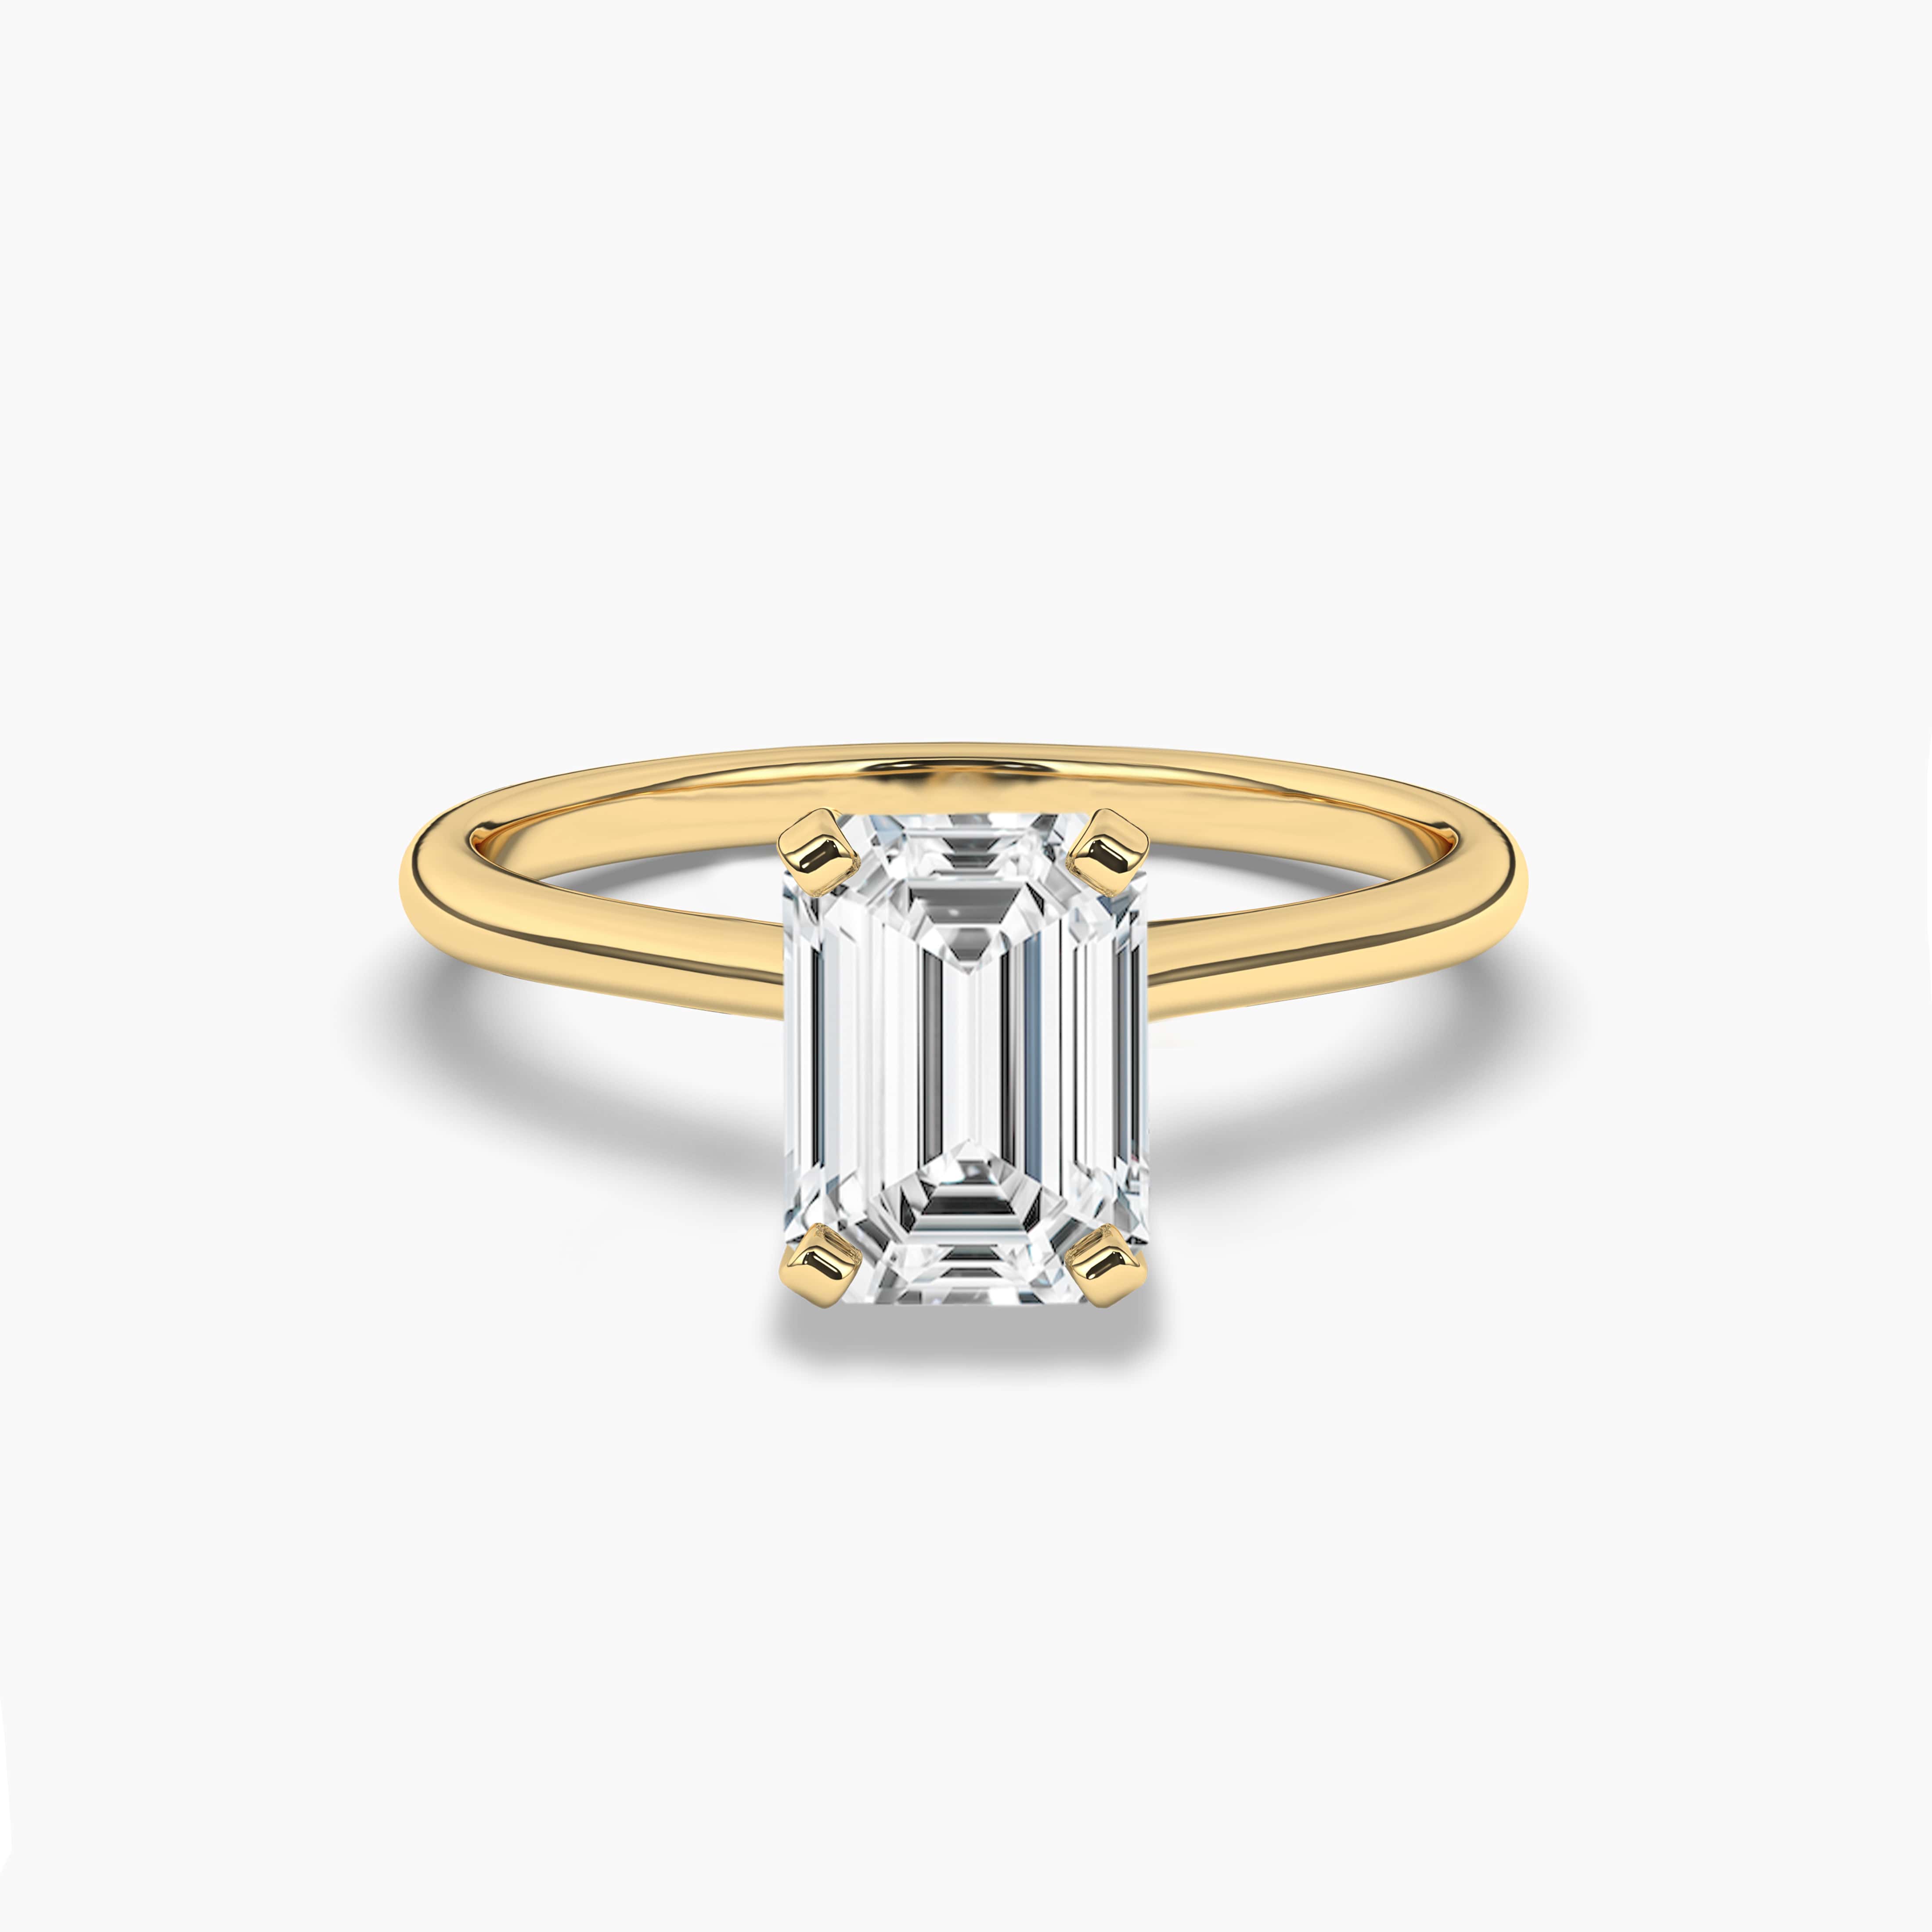 2 ct solitaire engagement ring